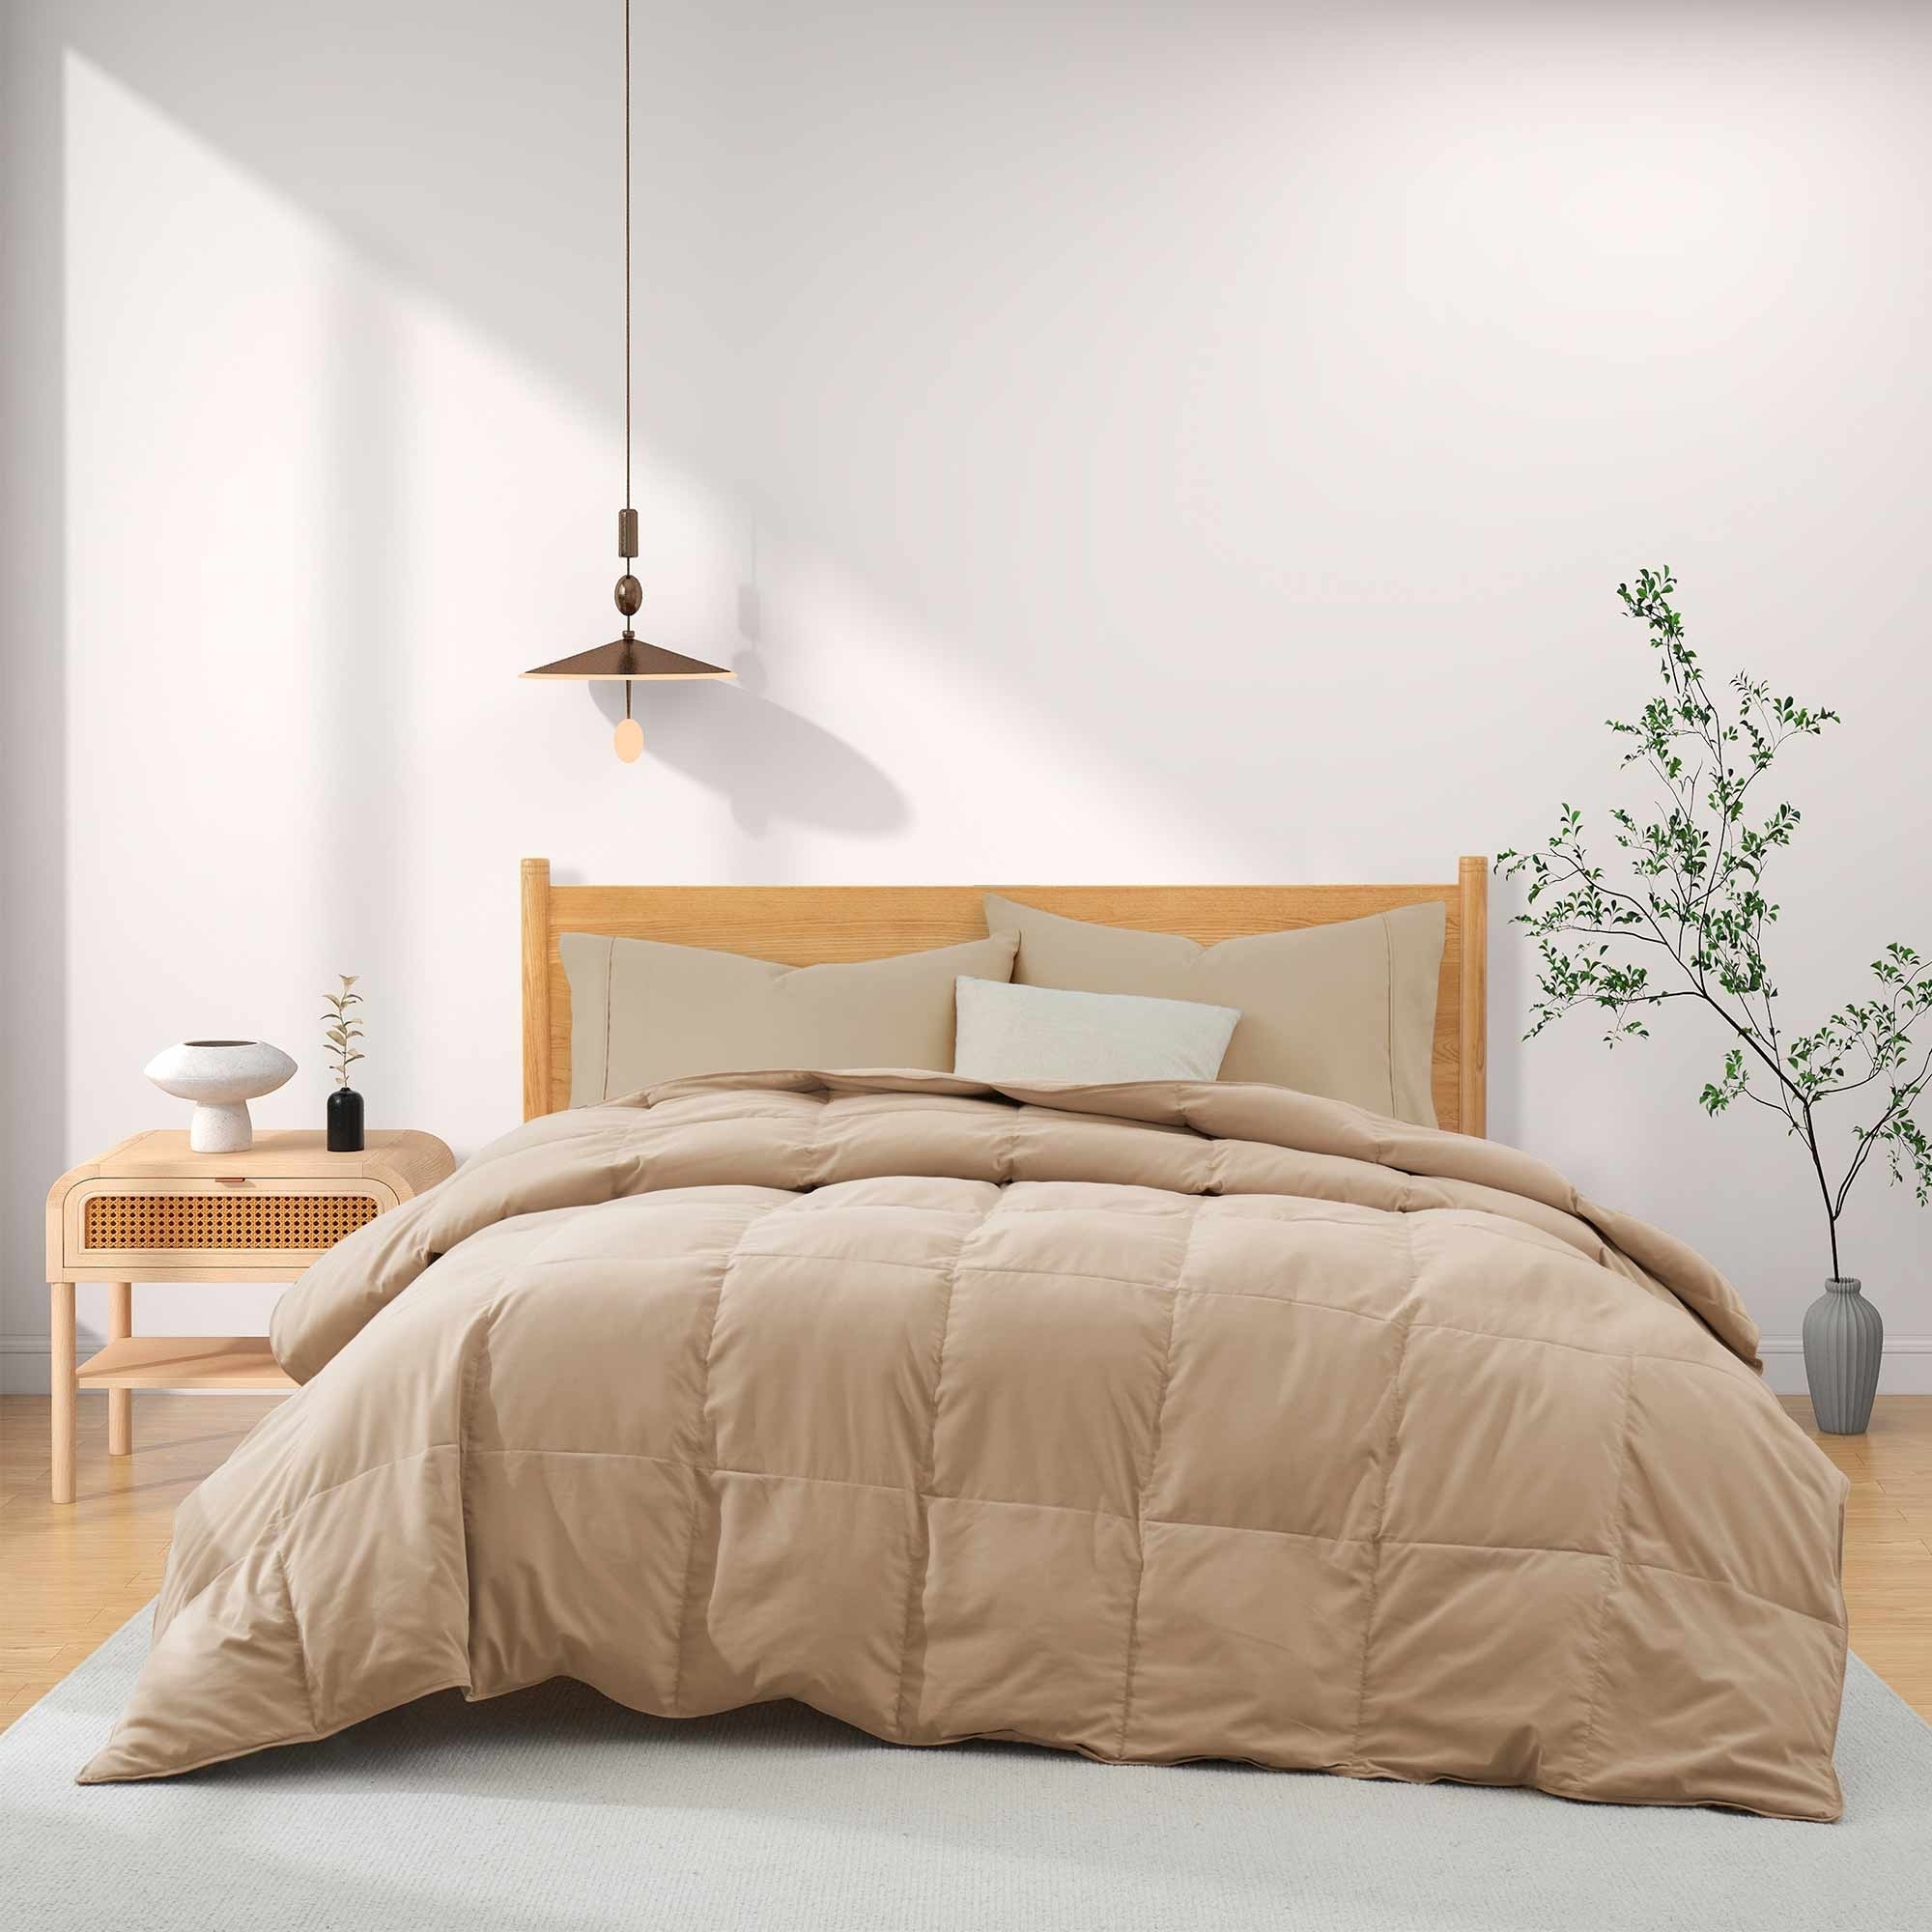 Lightweight Goose Feather And Down Comforter- Hotel Collection For Hot Sleepers - Ginger Root, California King